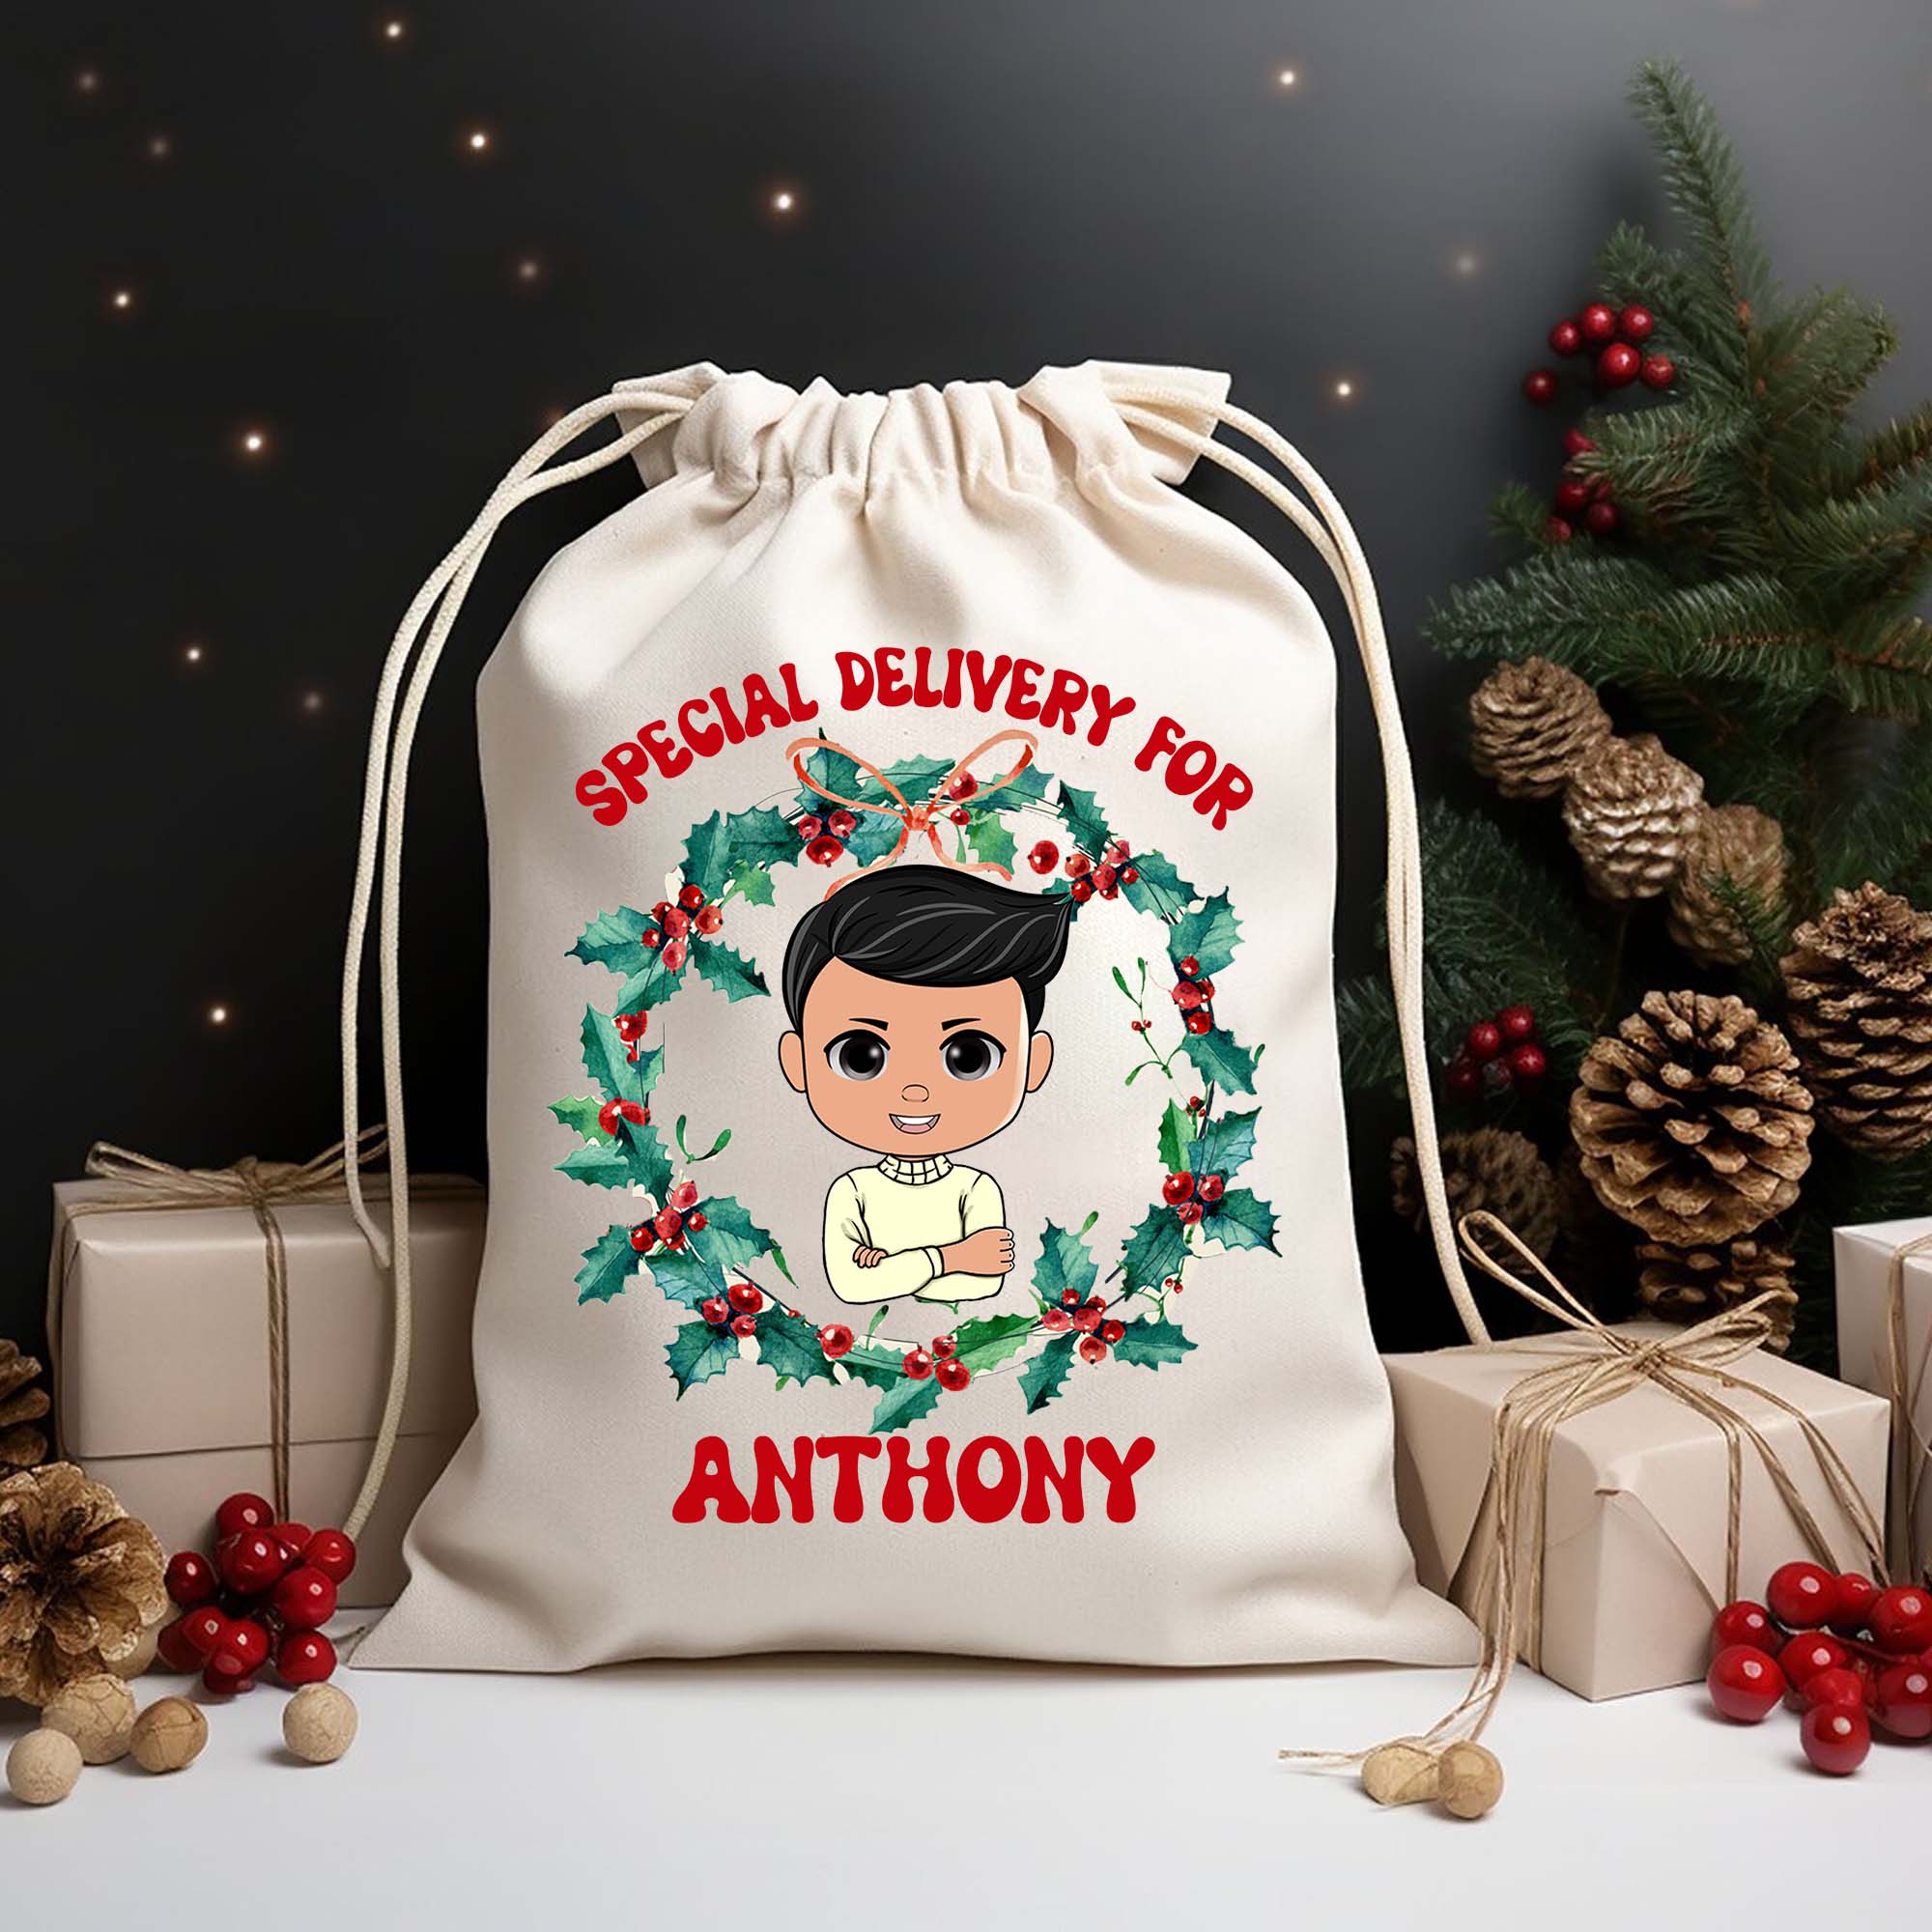 Special Delivery For Christmas Kid - Personalized String Bag, Christmas Gift, Gift For Family